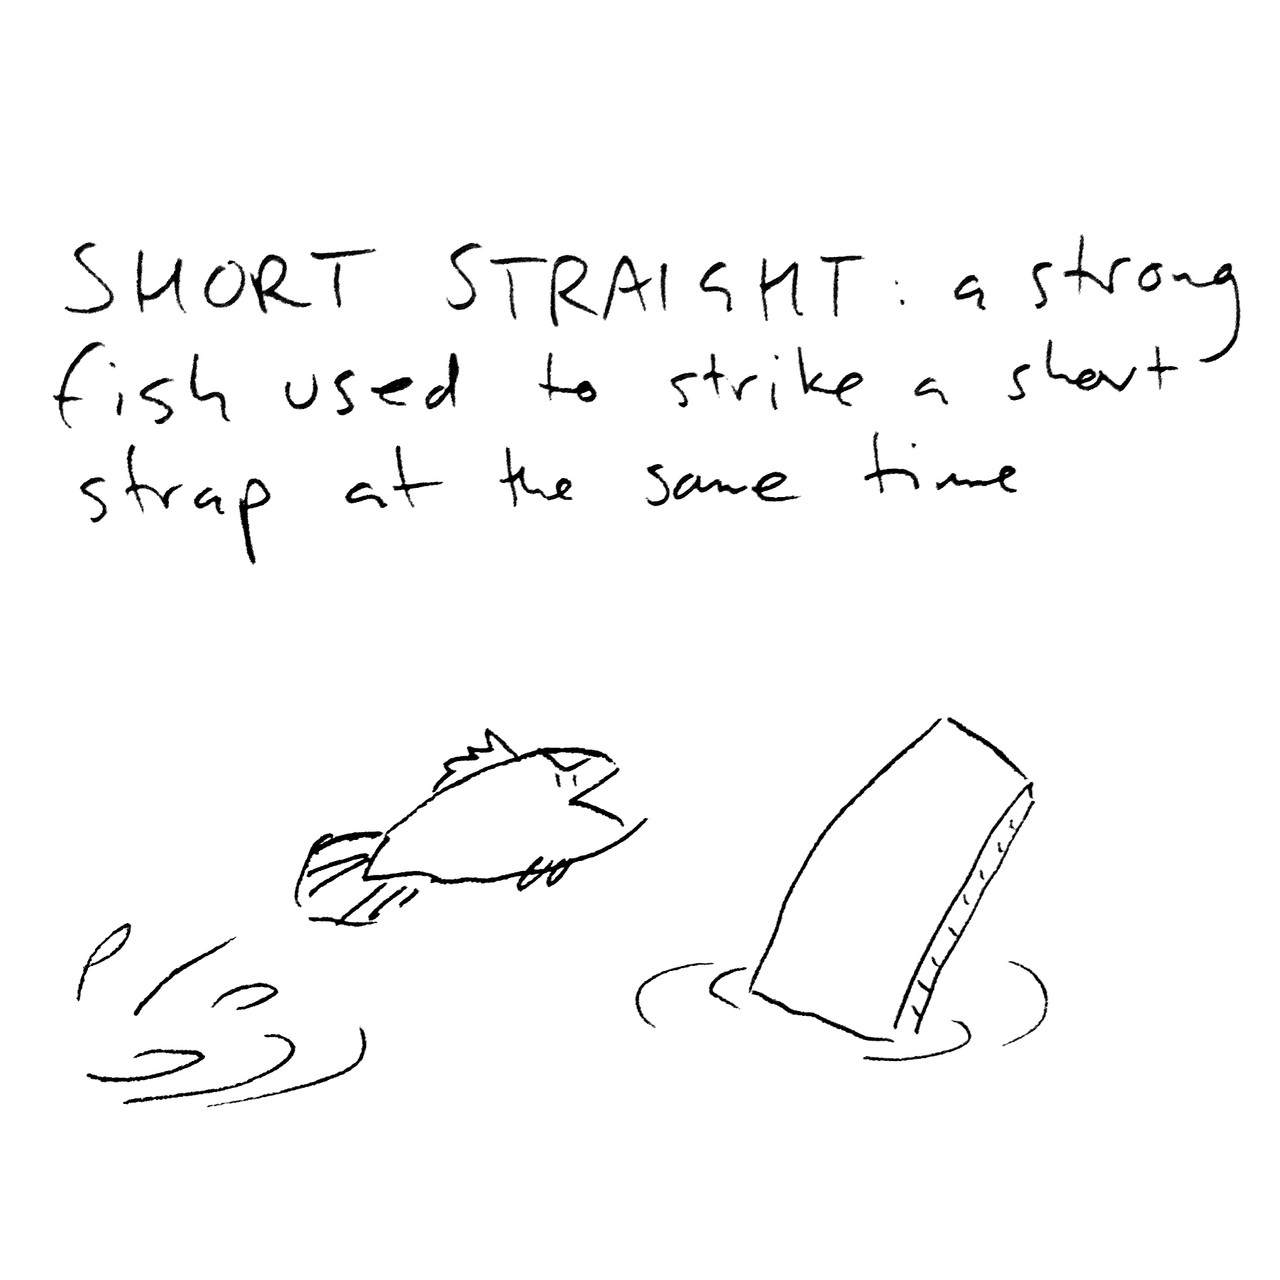 SHORT STRAIGHT: a strong fish used to strike a short strap at the same time. The drawing depicts a fish leaping from the water towards a curved strap.